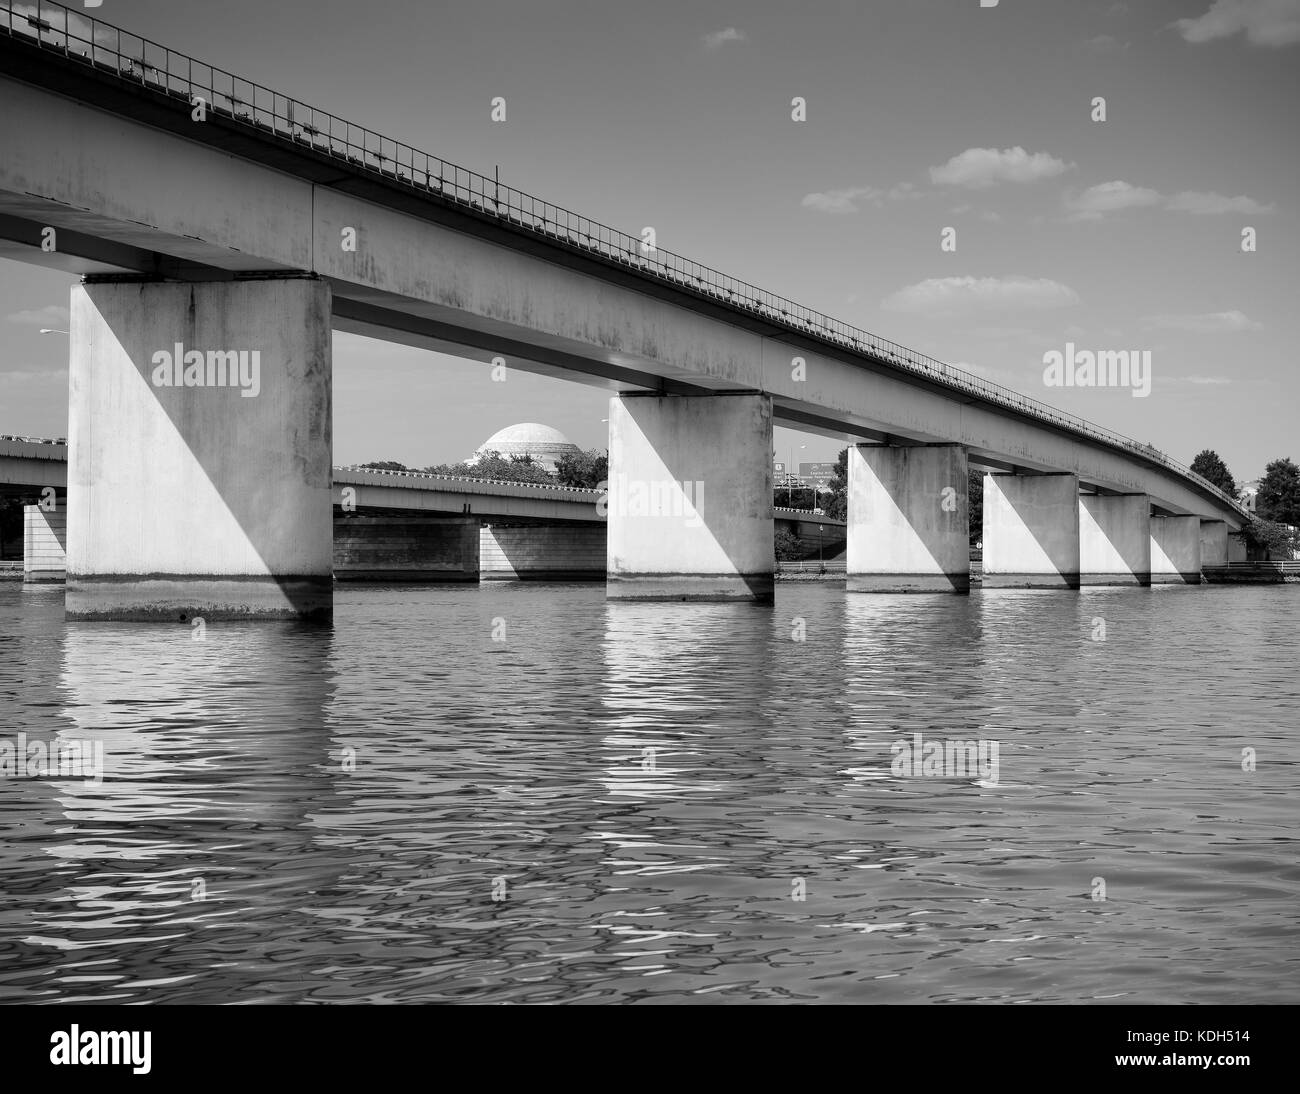 View across the Potomac river and the Theodore Roosevelt Bridge crossing from Washington, DC to the Commonwealth of Virginia, Stock Photo